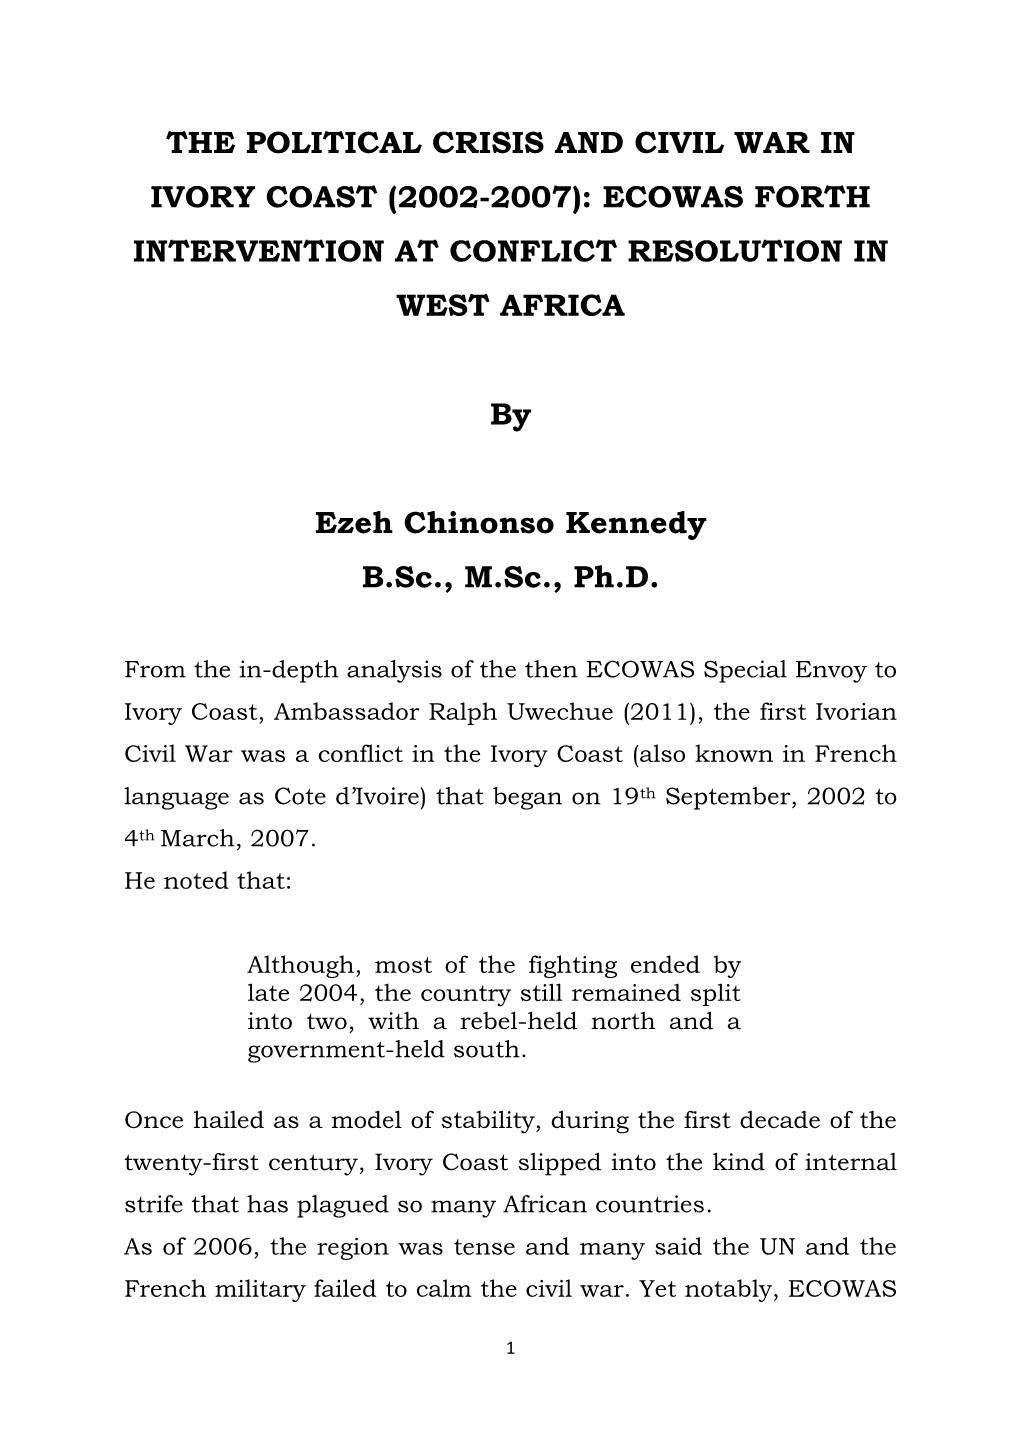 The Political Crisis and Civil War in Ivory Coast (2002-2007): Ecowas Forth Intervention at Conflict Resolution in West Africa